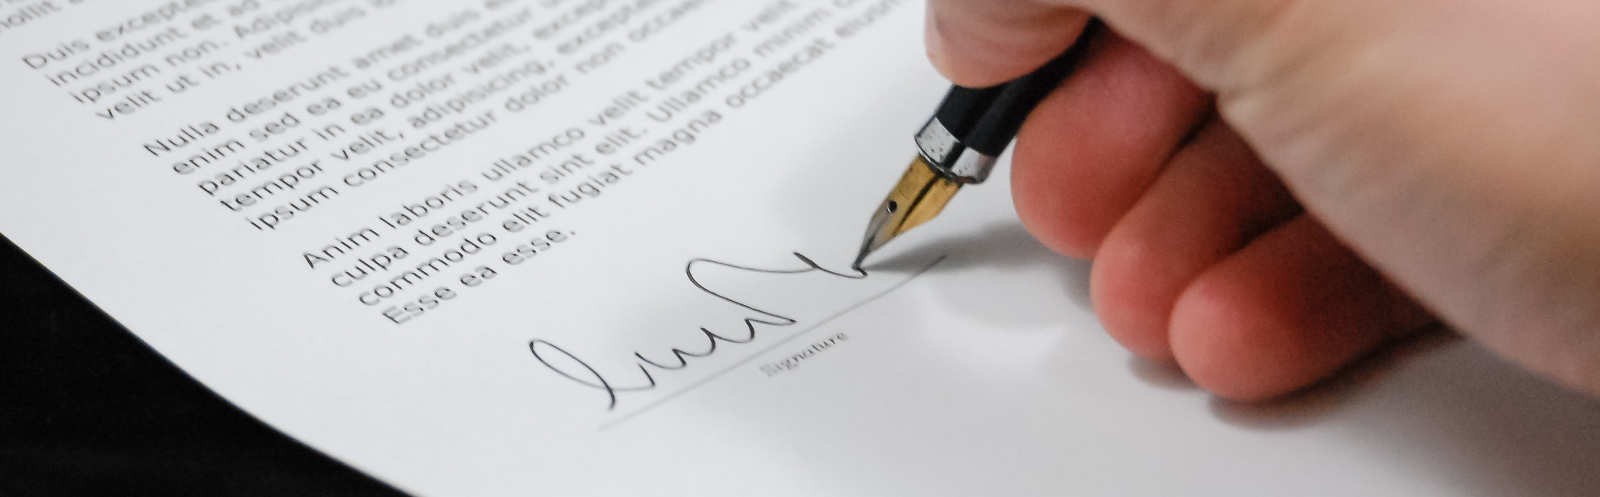 Hand signing the line on a legal document